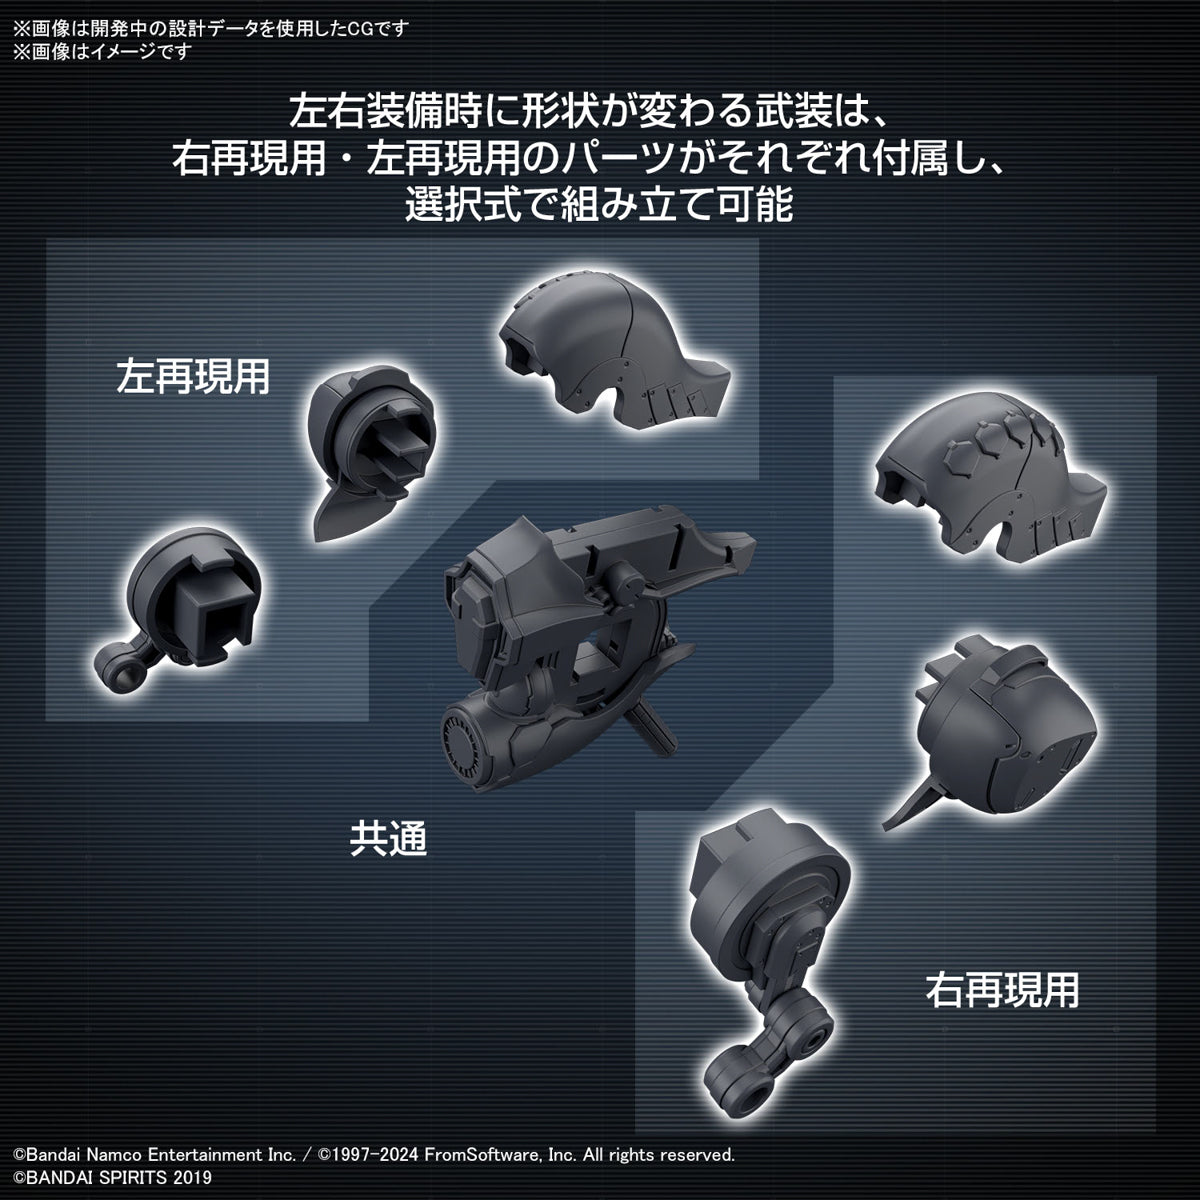 [PRE-ORDER] 30MM Armored Core VI Fires of Rubicon Weapon Set 01